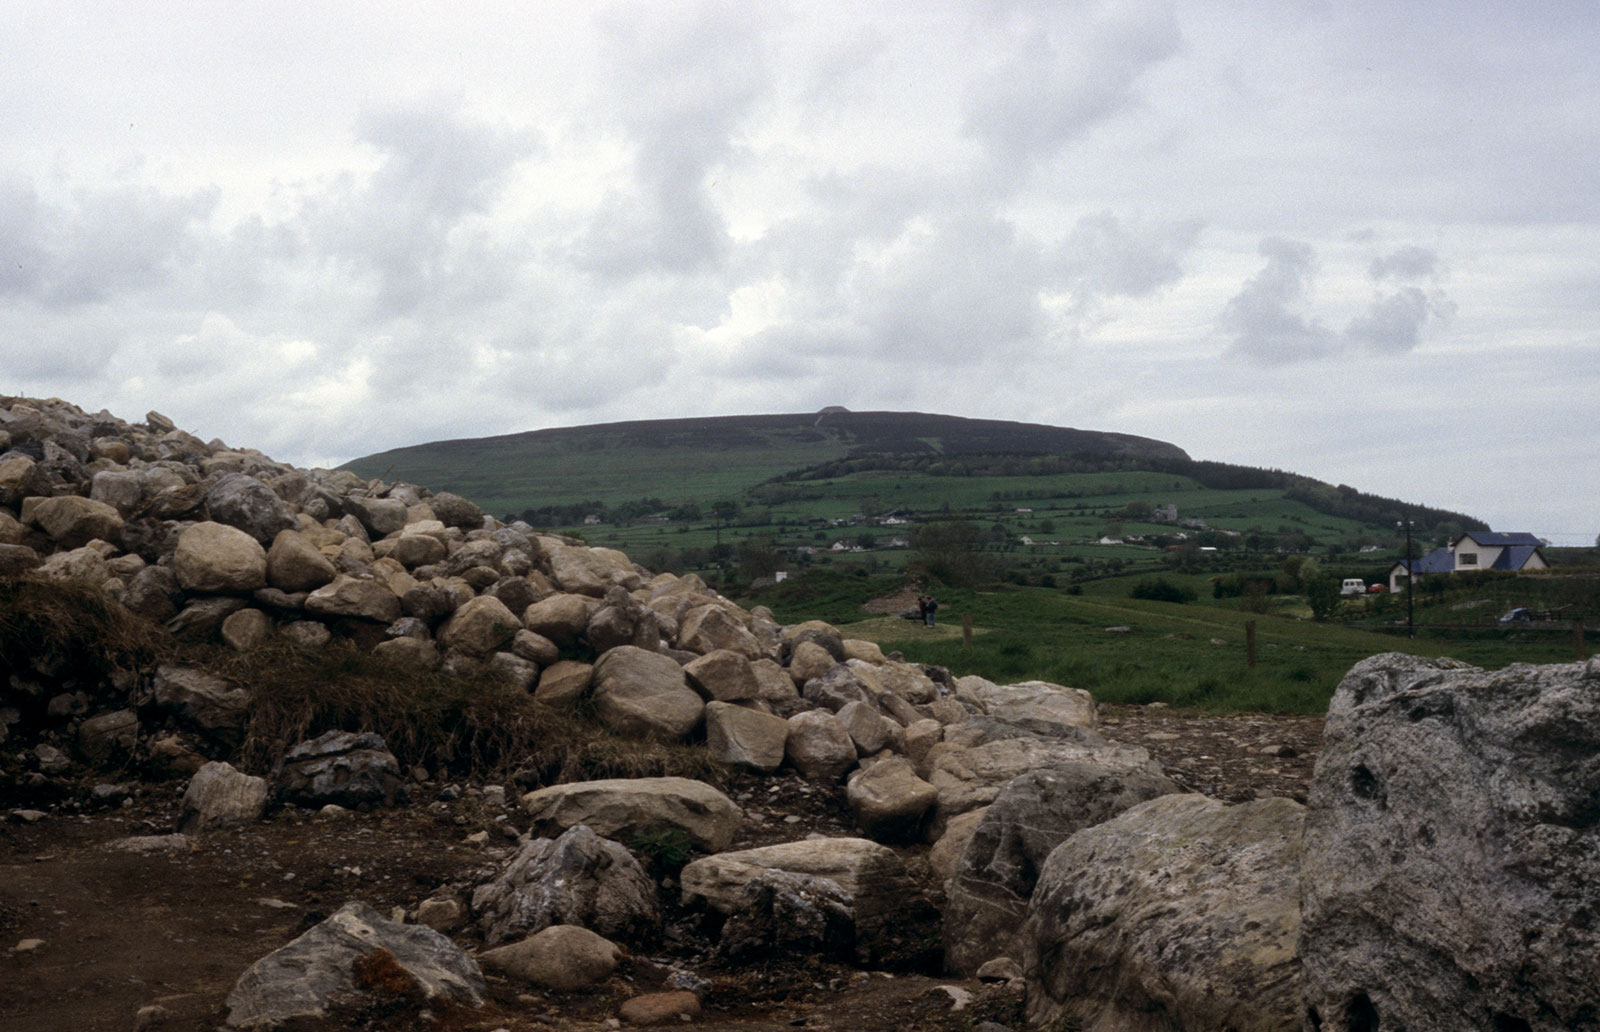 The view from Listoghil to Knocknarea during the excavations.